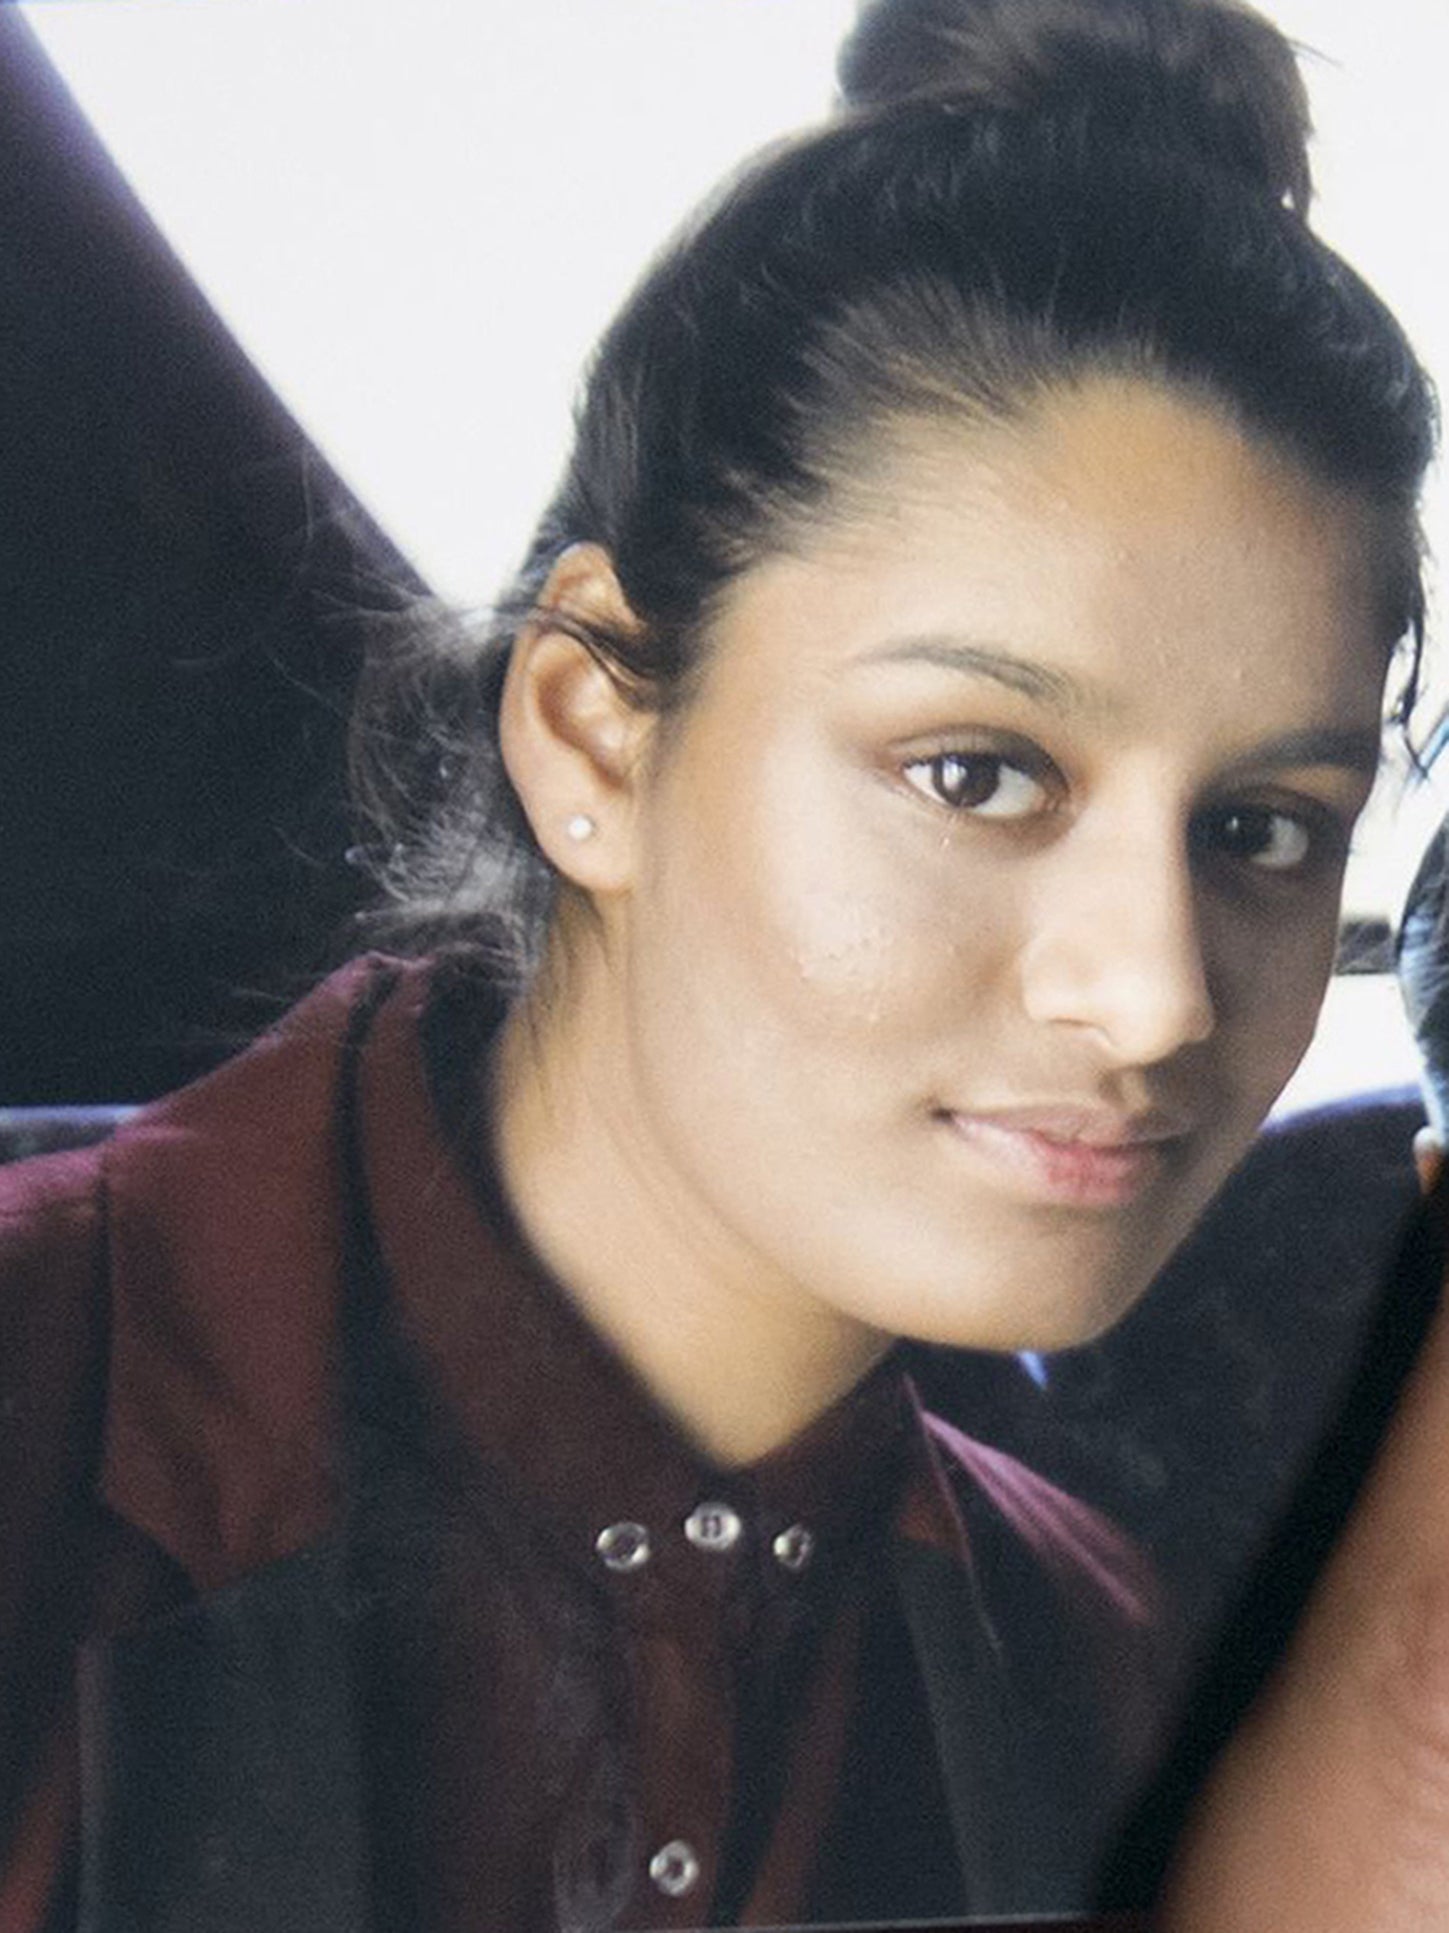 In June, a court heard there is ‘overwhelming evidence’ that Begum was a victim of trafficking when she left the UK